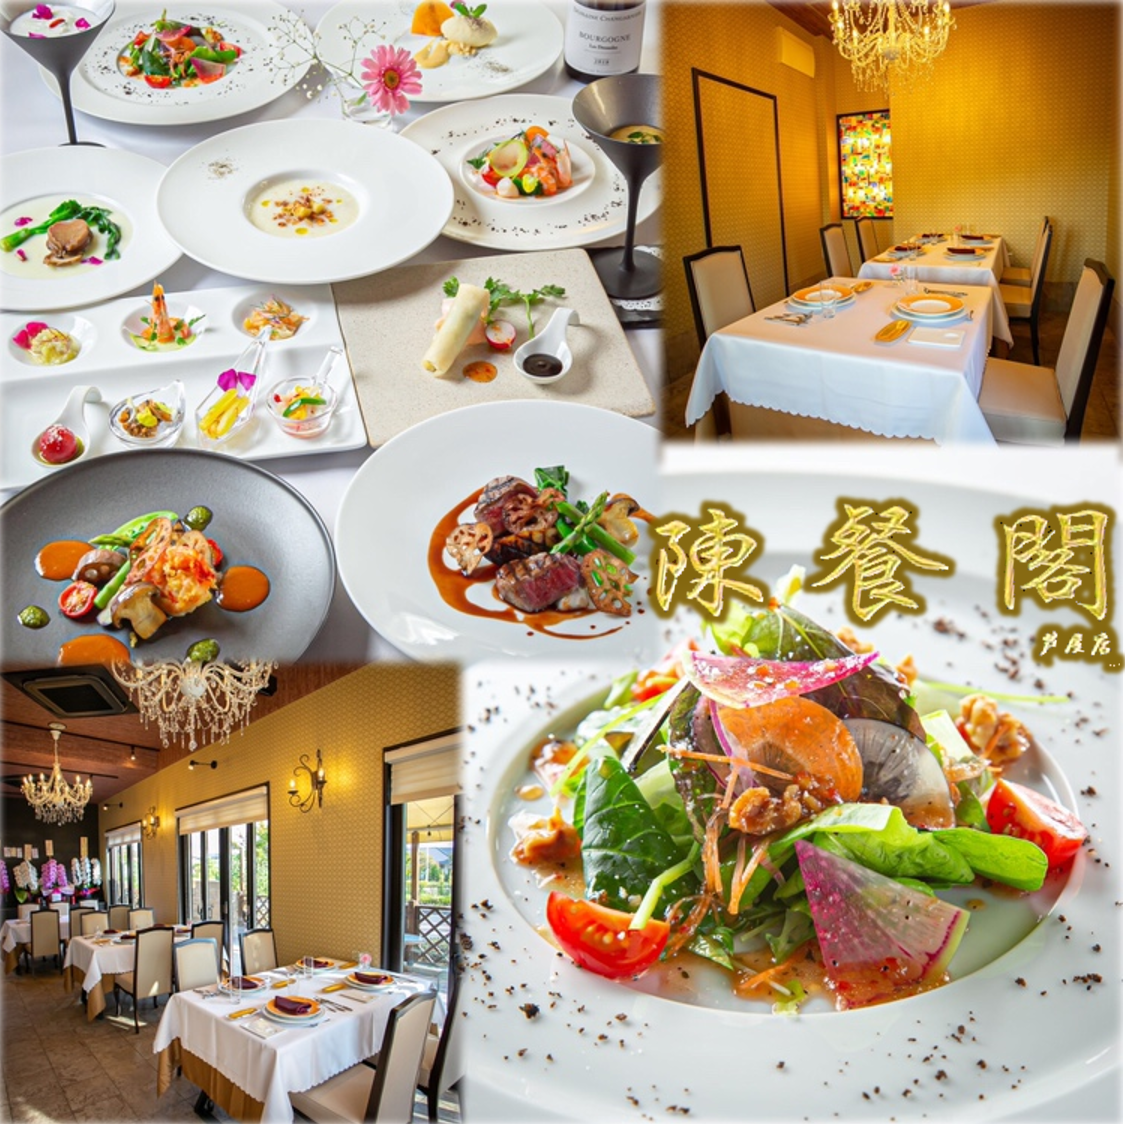 New Open in a quiet residential area ◎ Offering "Authentic Chinese" and "Authentic French" in various courses ◎